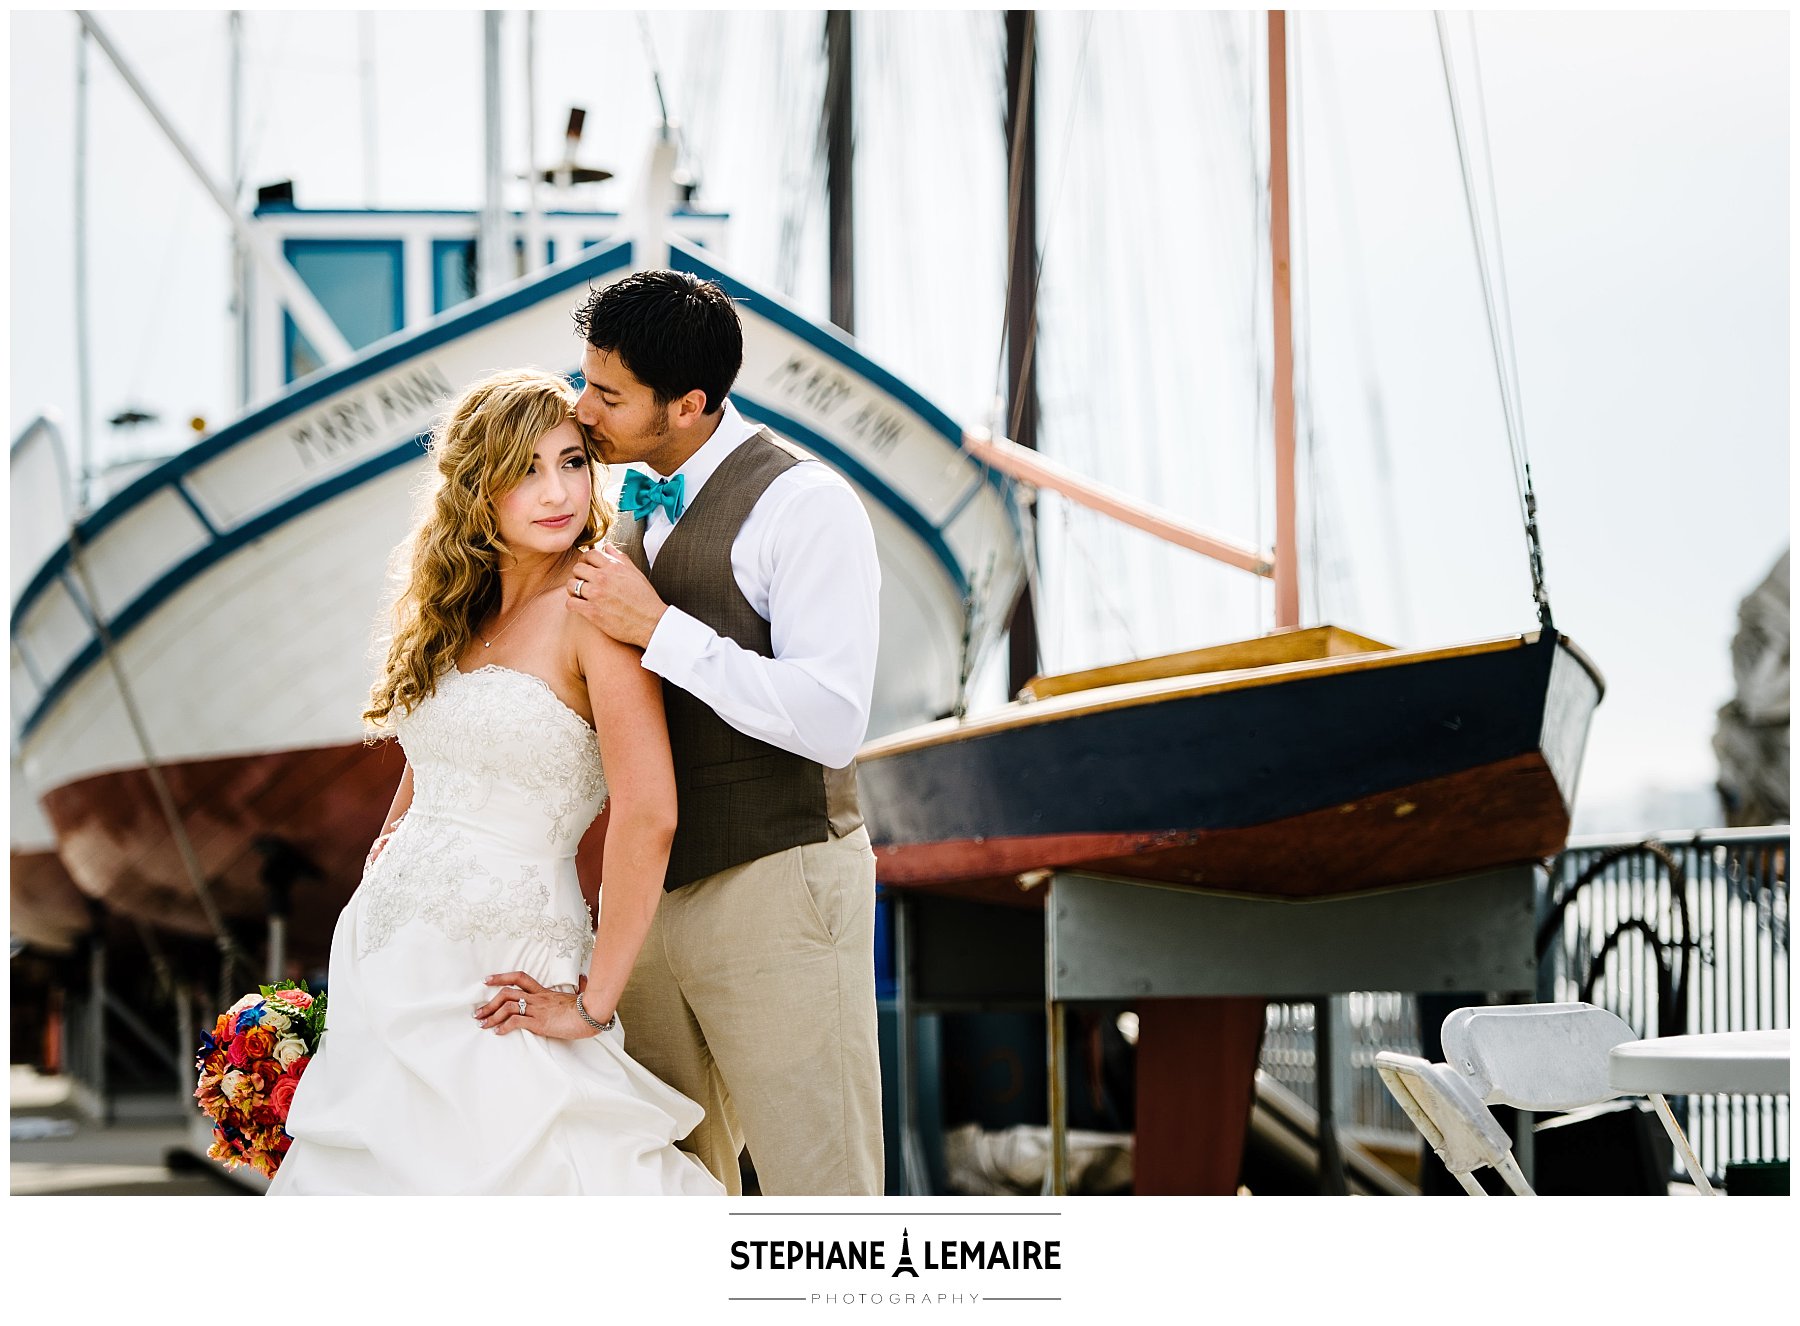 Bride and groom posing in front of a boat